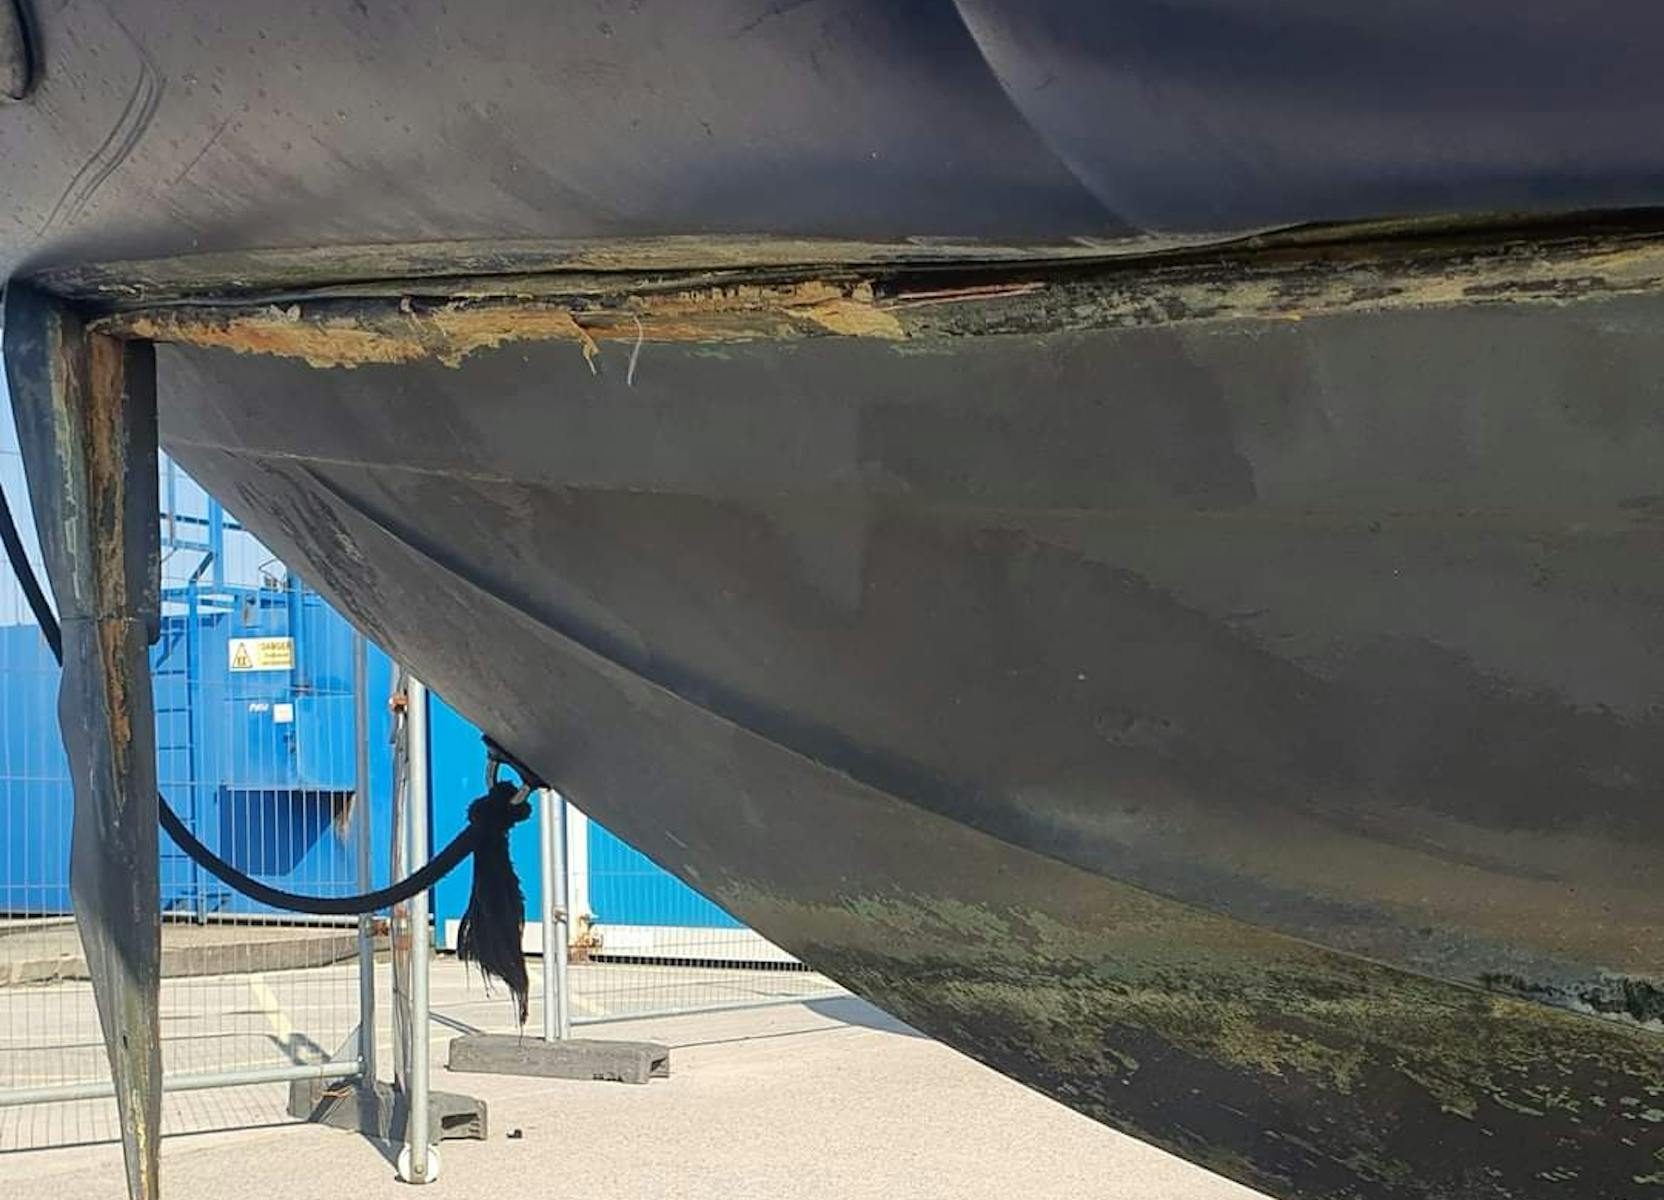 Ribtec tube attempting to separate from the hull